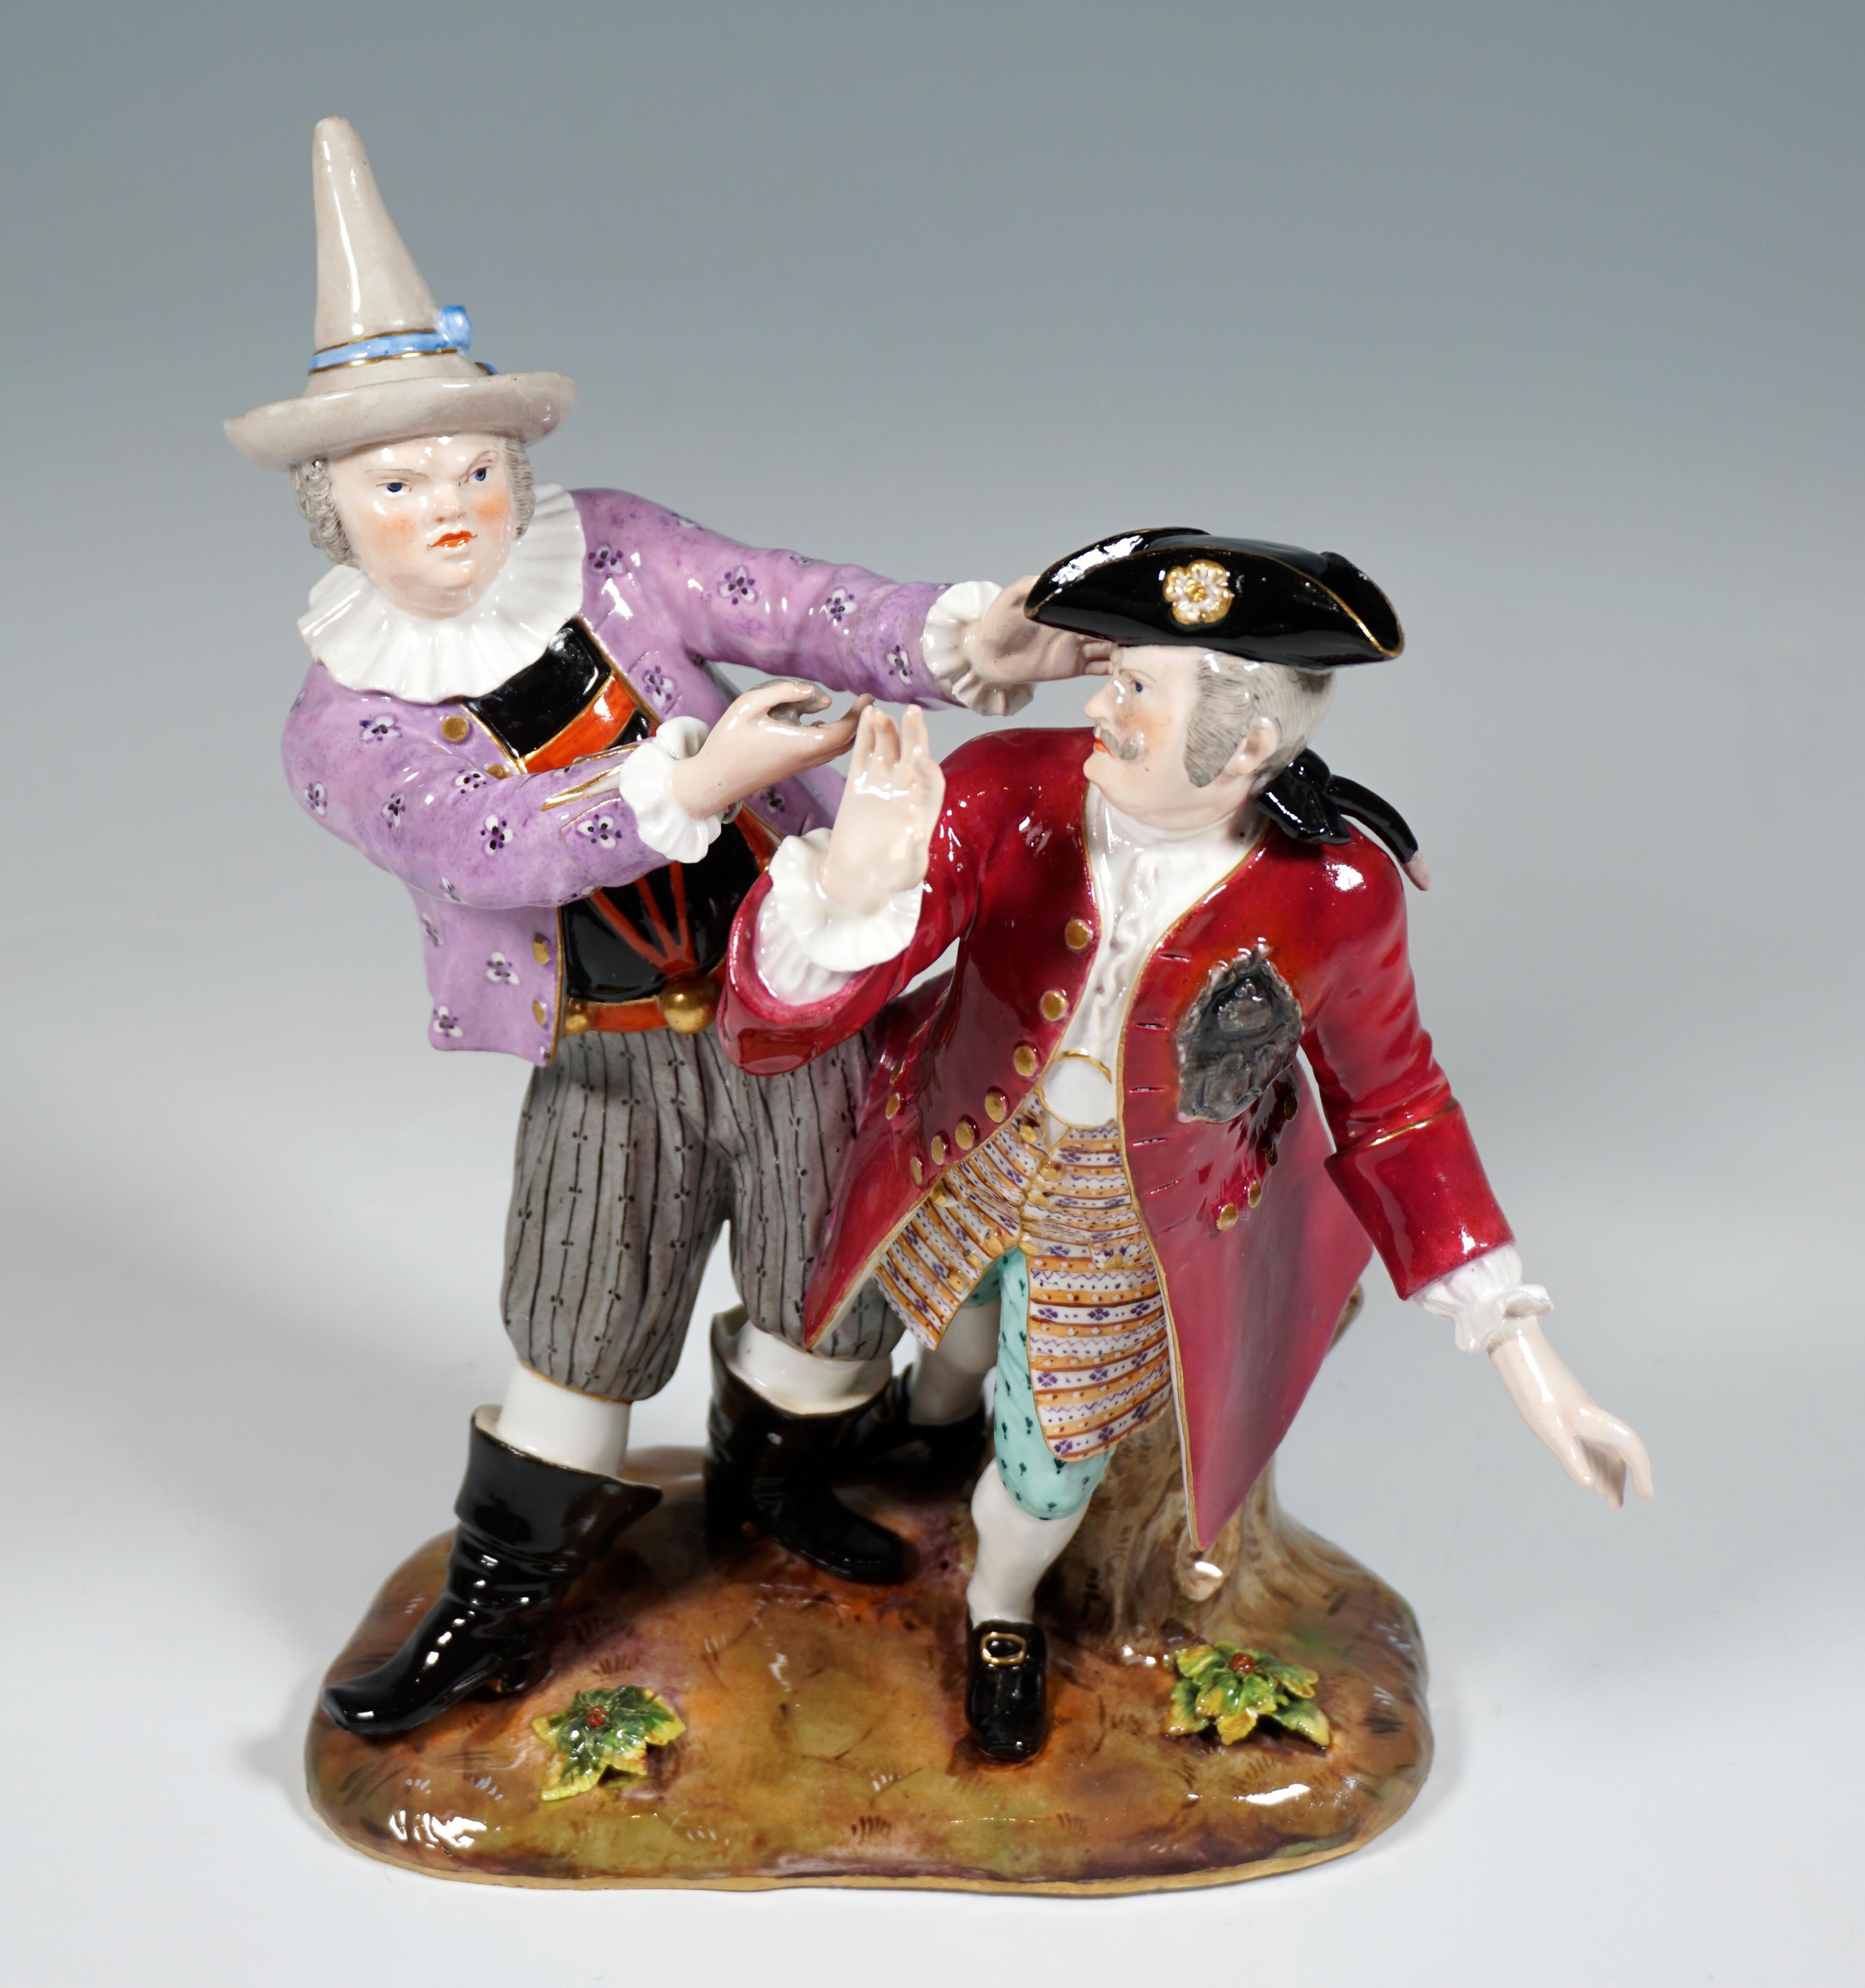 Mid-19th Century Meissen Group, Court Jesters Froehlich & Schmiedel, by Kaendler, Germany ca 1850